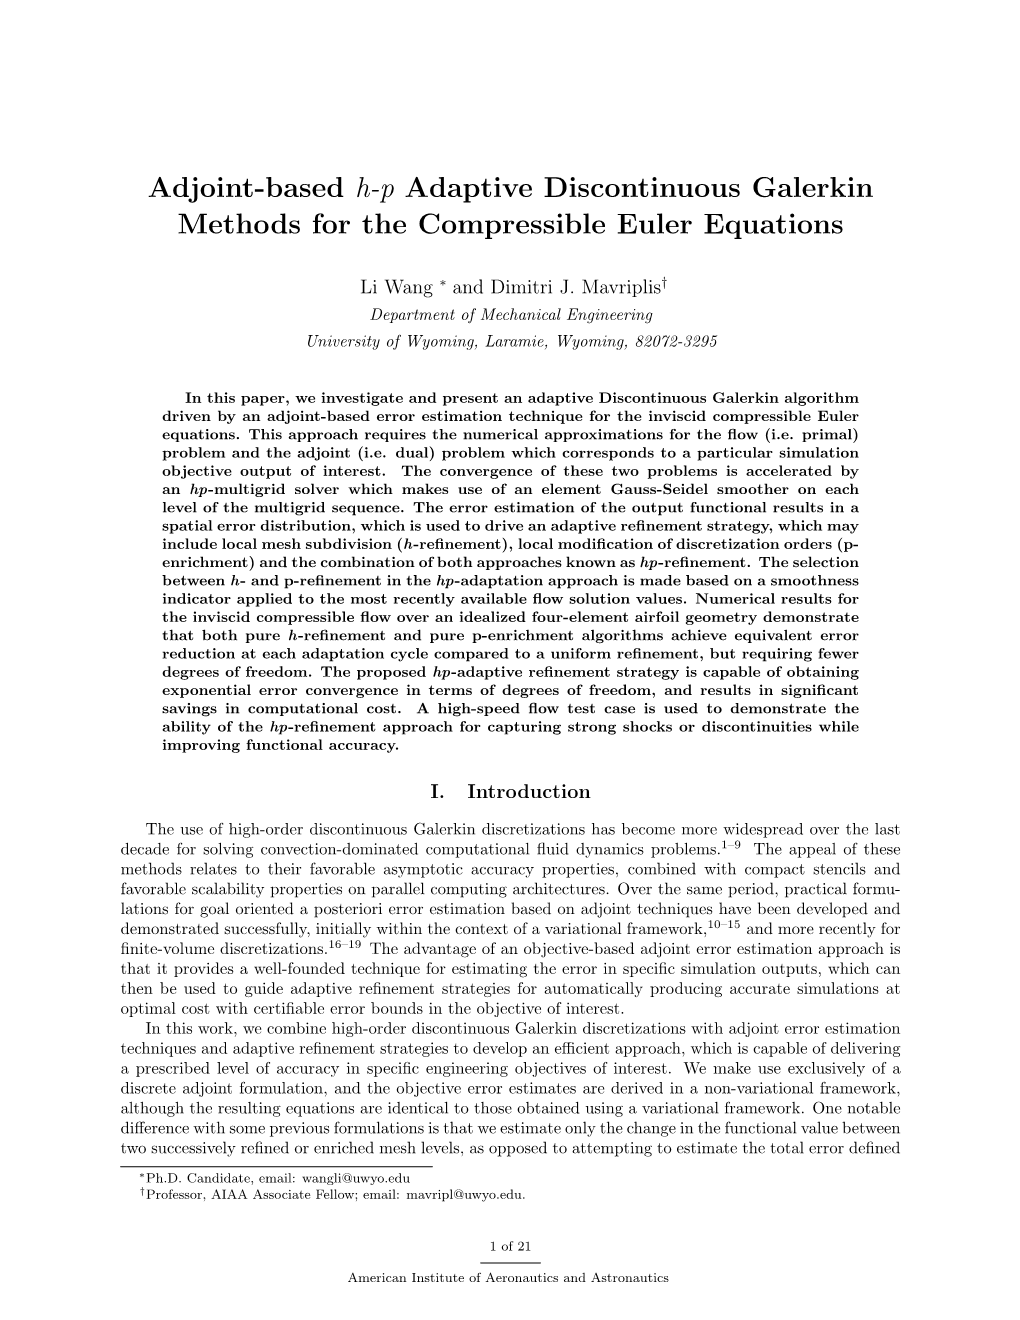 Adjoint-Based H-P Adaptive Discontinuous Galerkin Methods for the Compressible Euler Equations